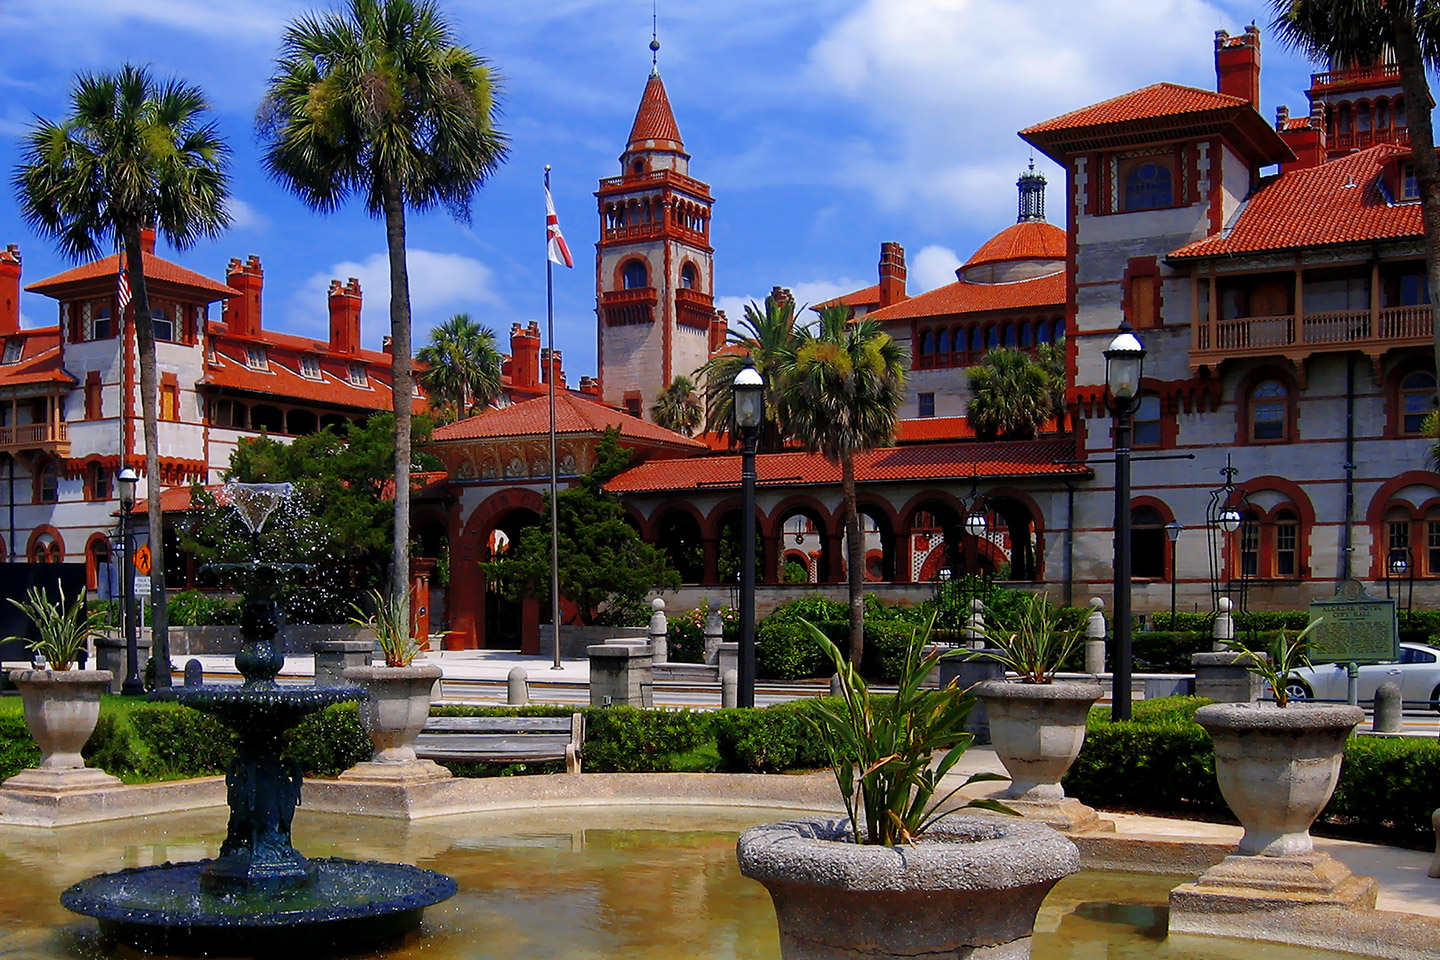 Visit St Augustine on foot, by trolleybus or by bus Transport from